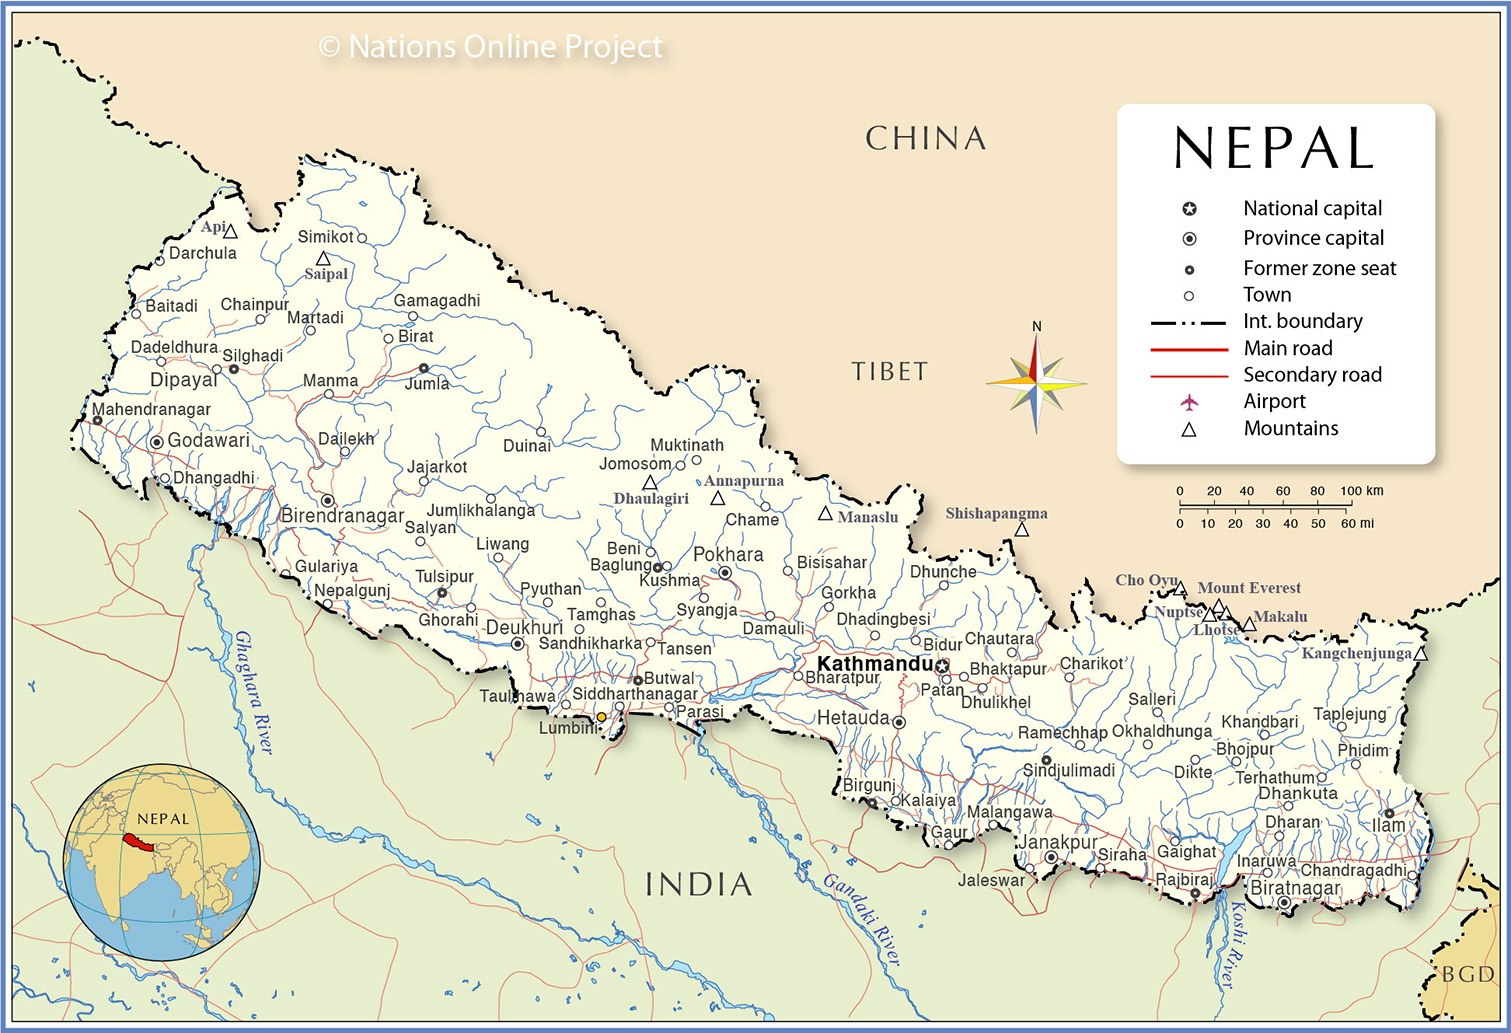 Nepal Map Public Domain from Nations Online Project